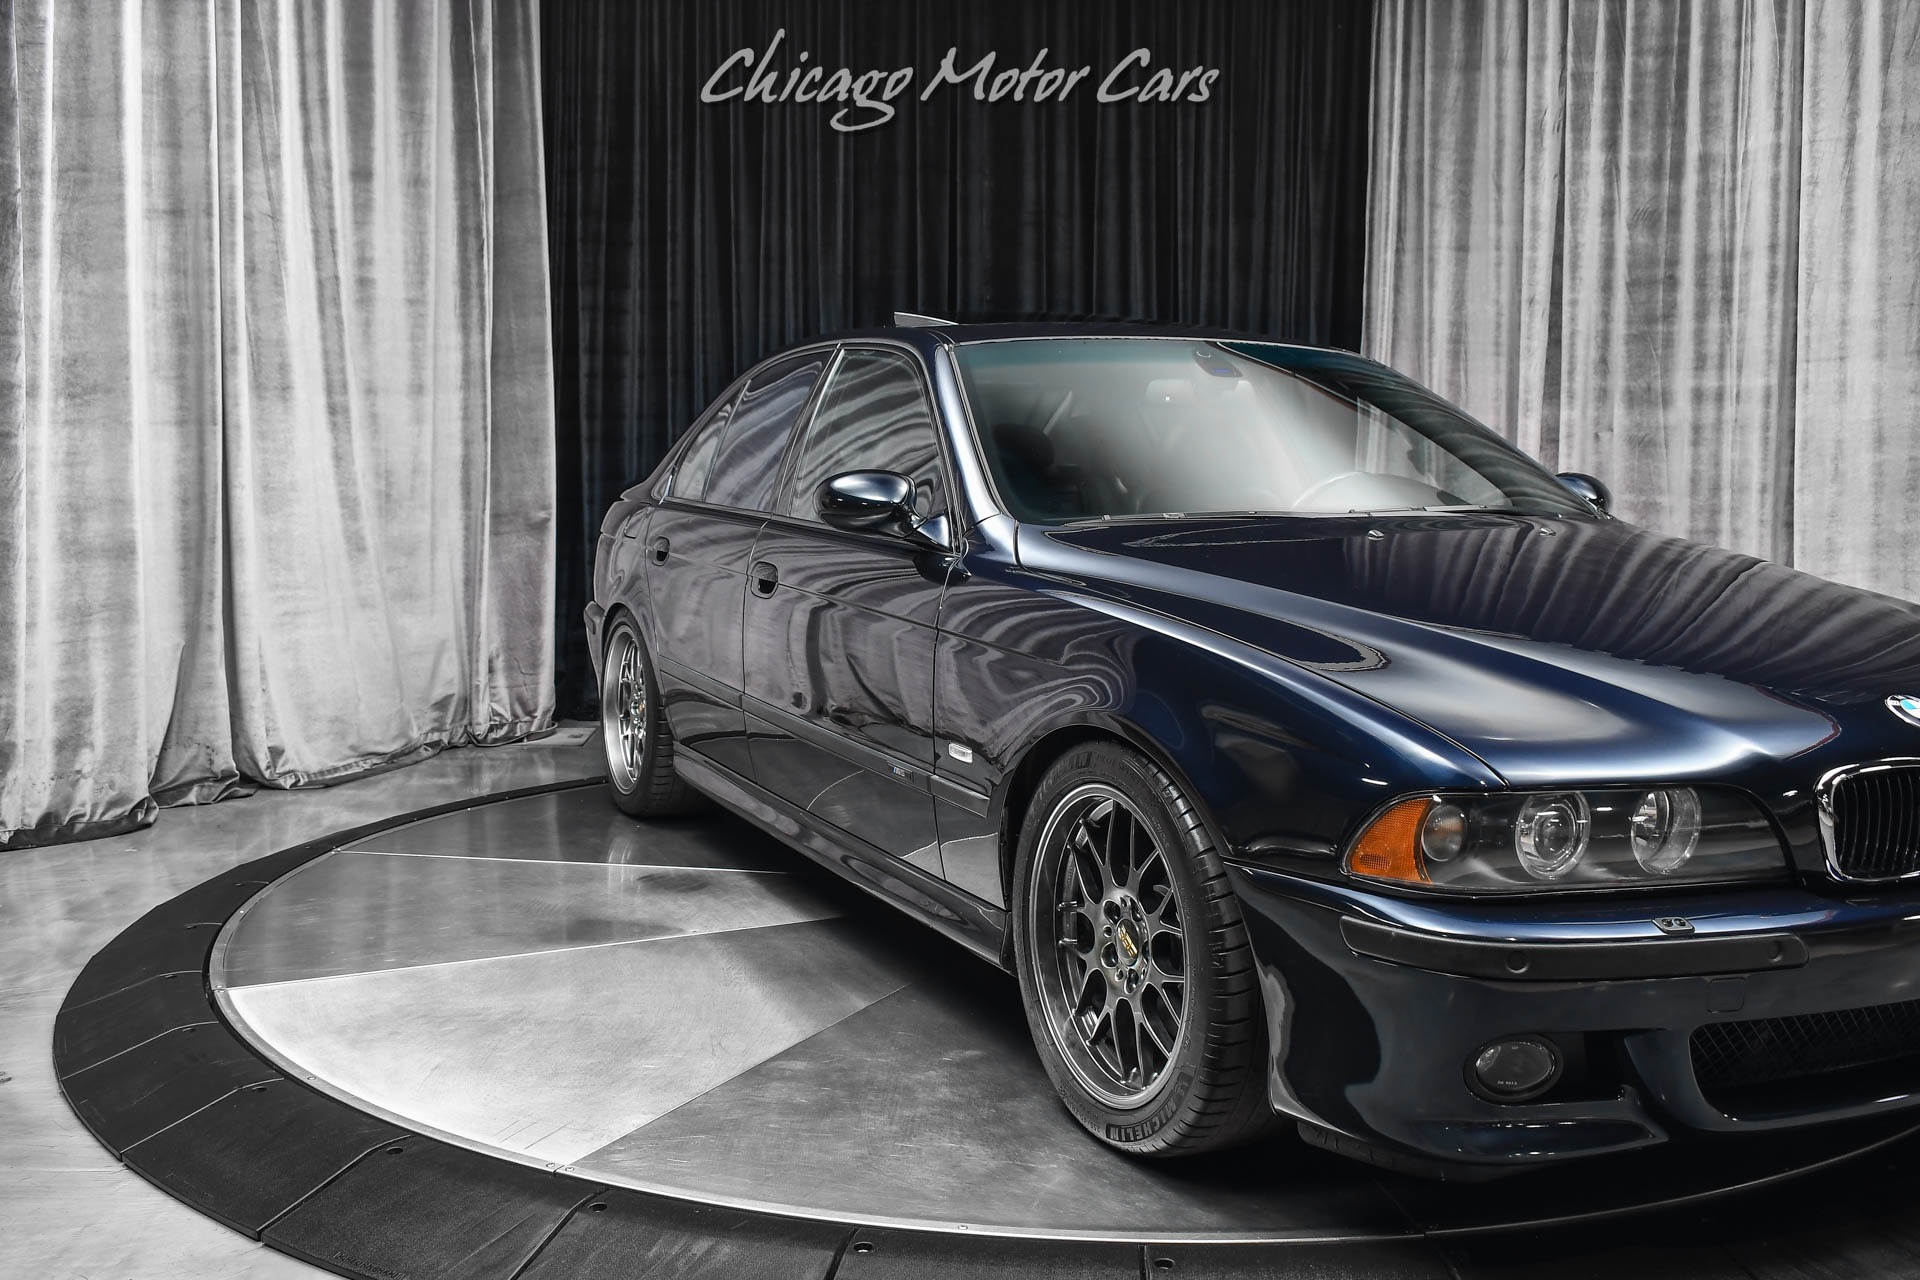 Used-2002-BMW-M5-6-Speed-Manual-Tastefully-Upgraded-400-HP-Serviced-STUNNING-Example